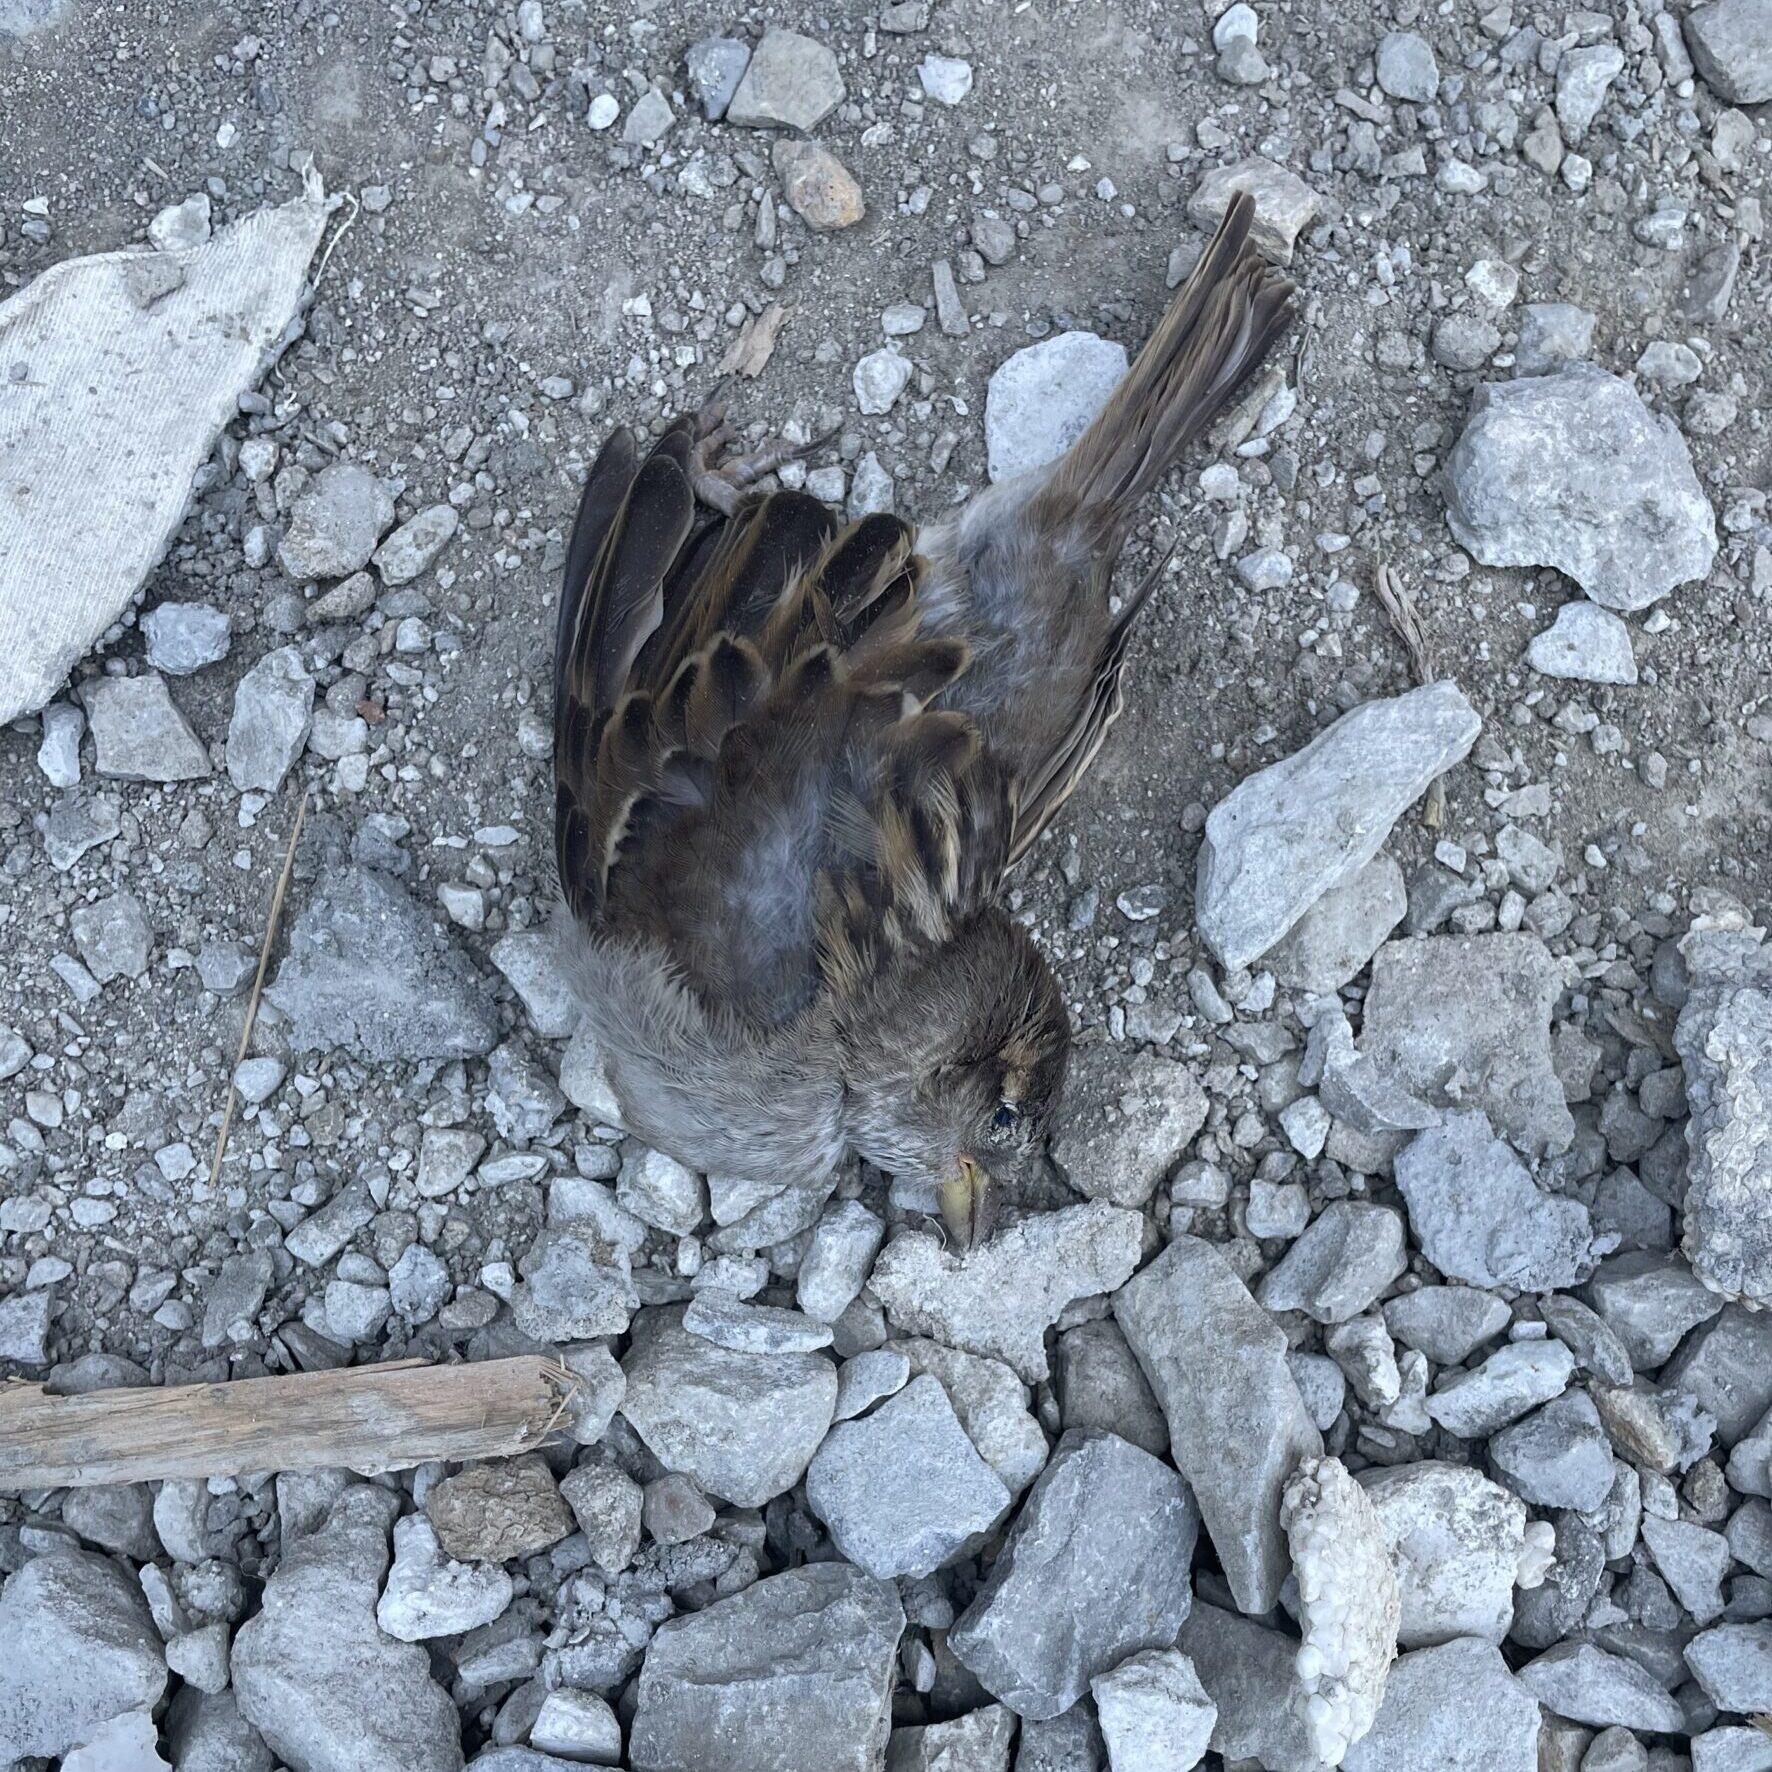 One of the birds at our the construction site of our new home didn't make it. It may be the mama bird.